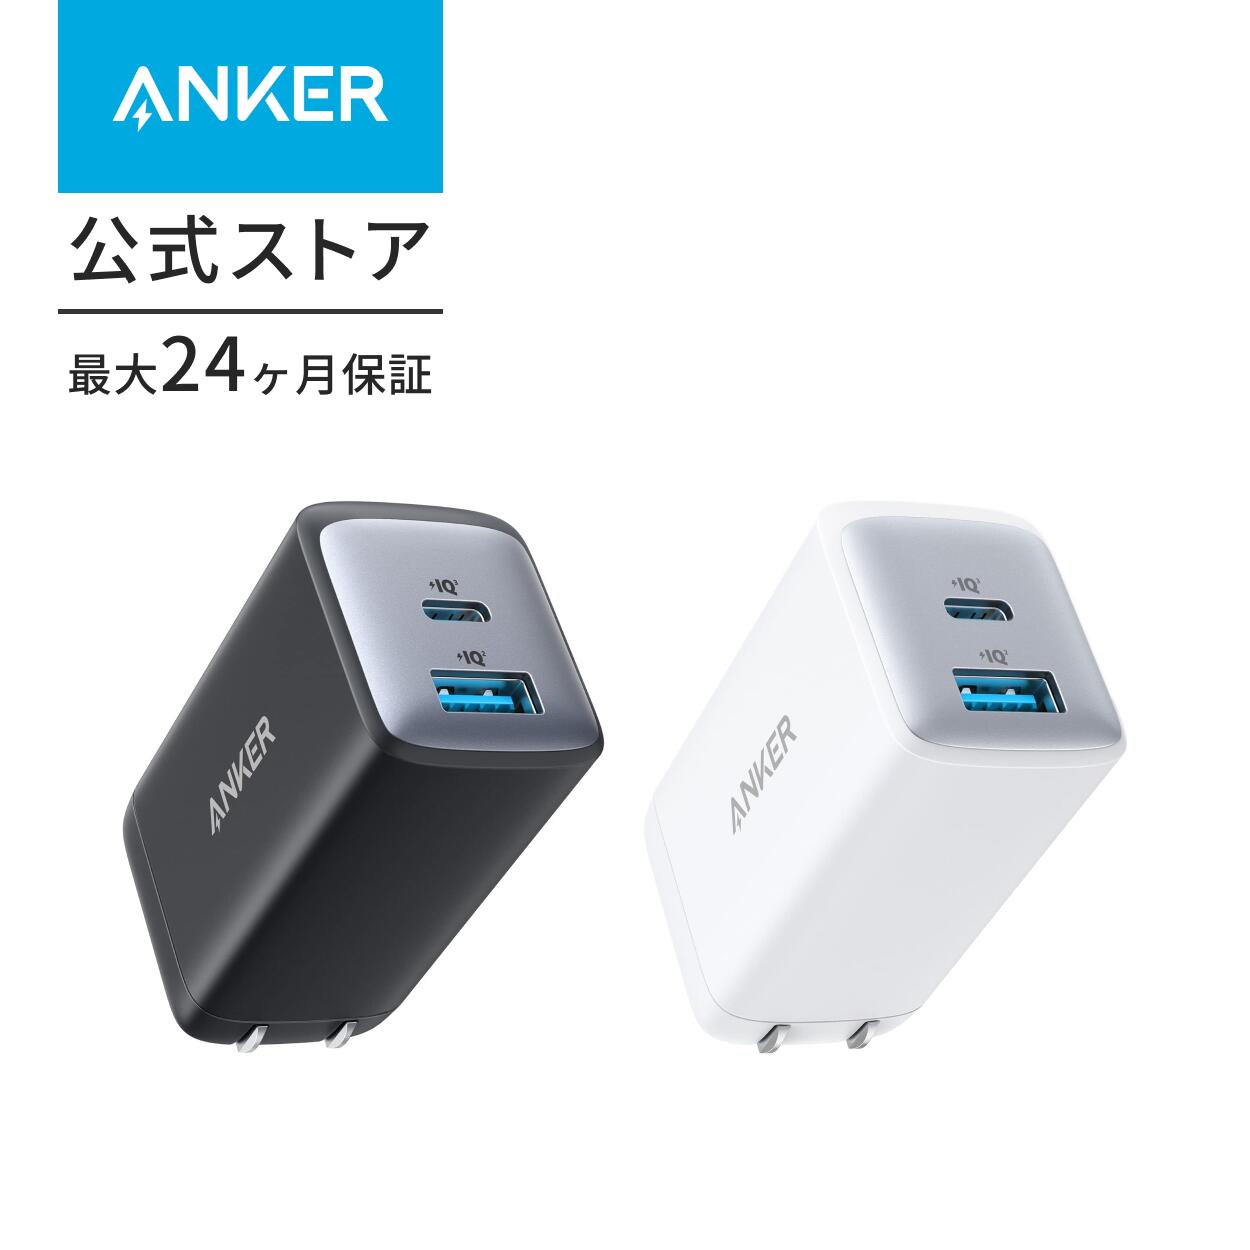 Anker 725 Charger (65W) (USB PD 65W 急速充電